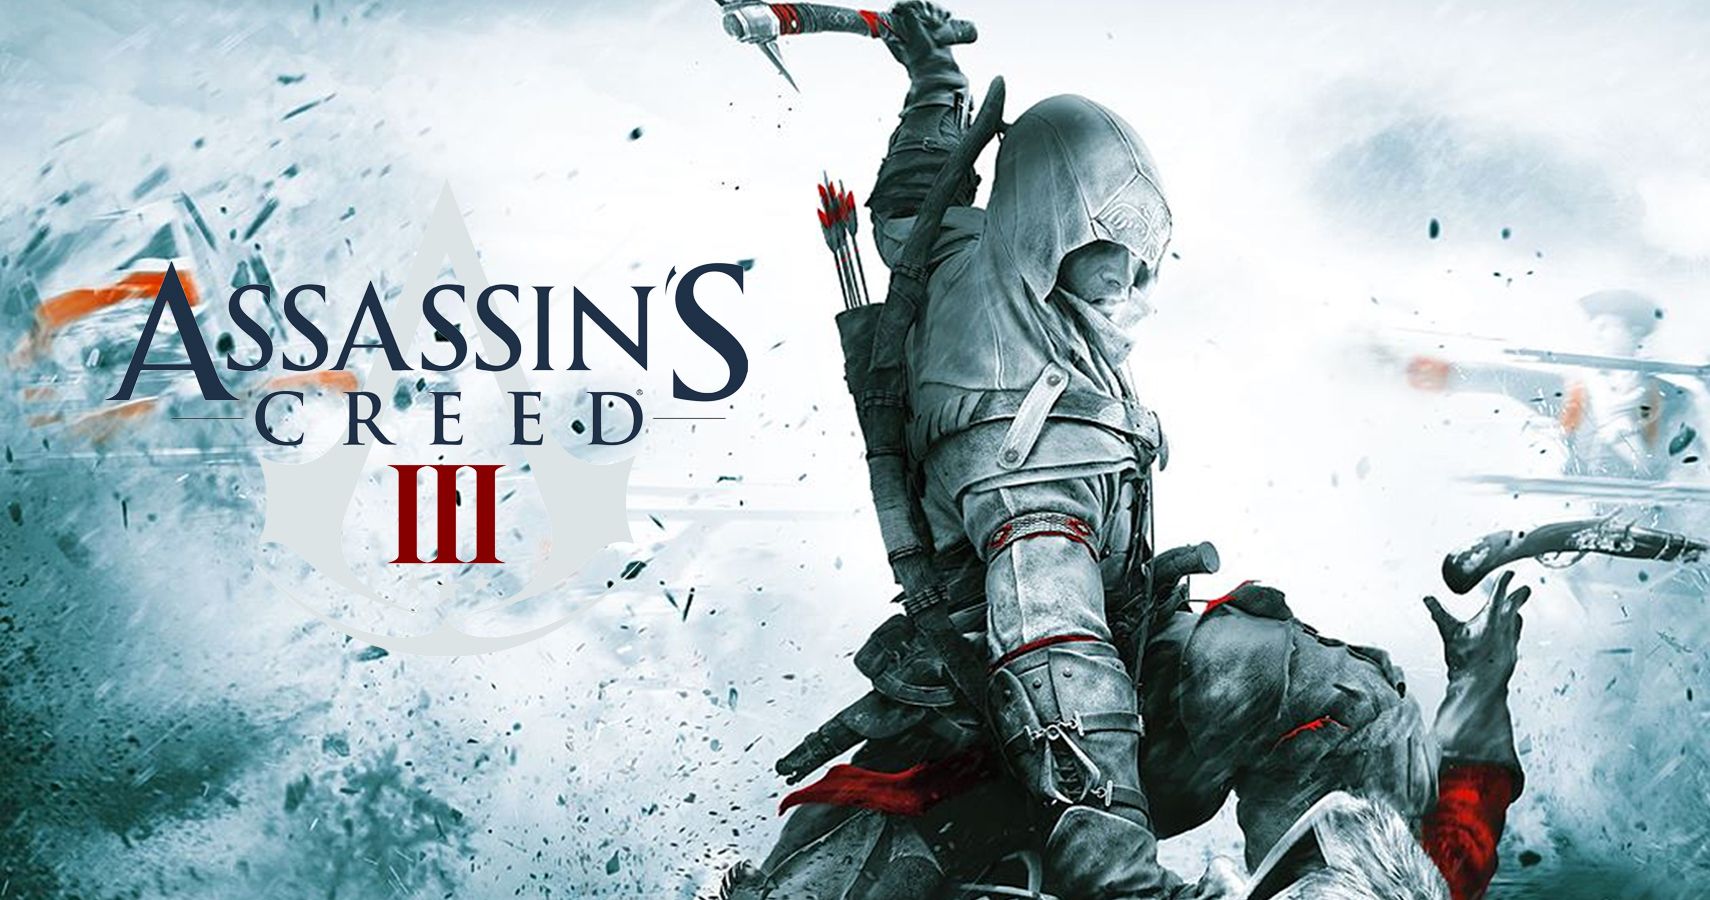 Assassin creed uplay steam (120) фото